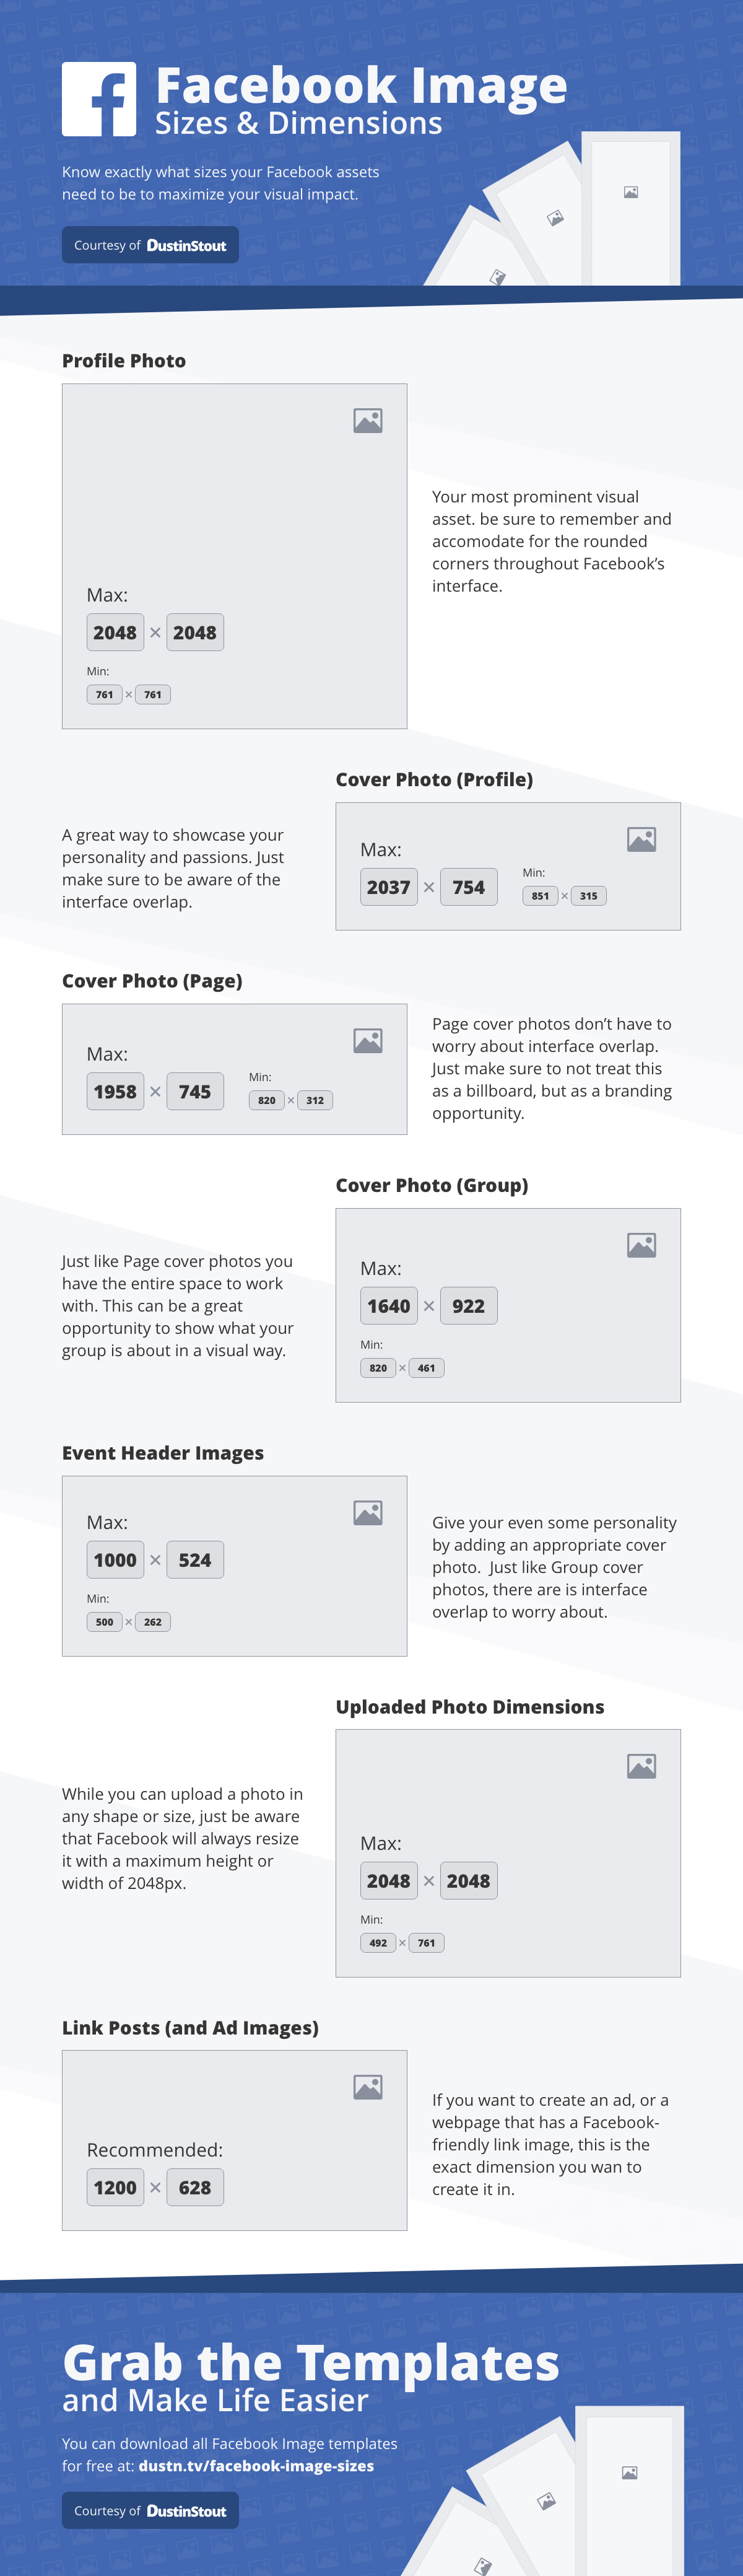 Facebook Image Sizes Infographic by Dustin Stout